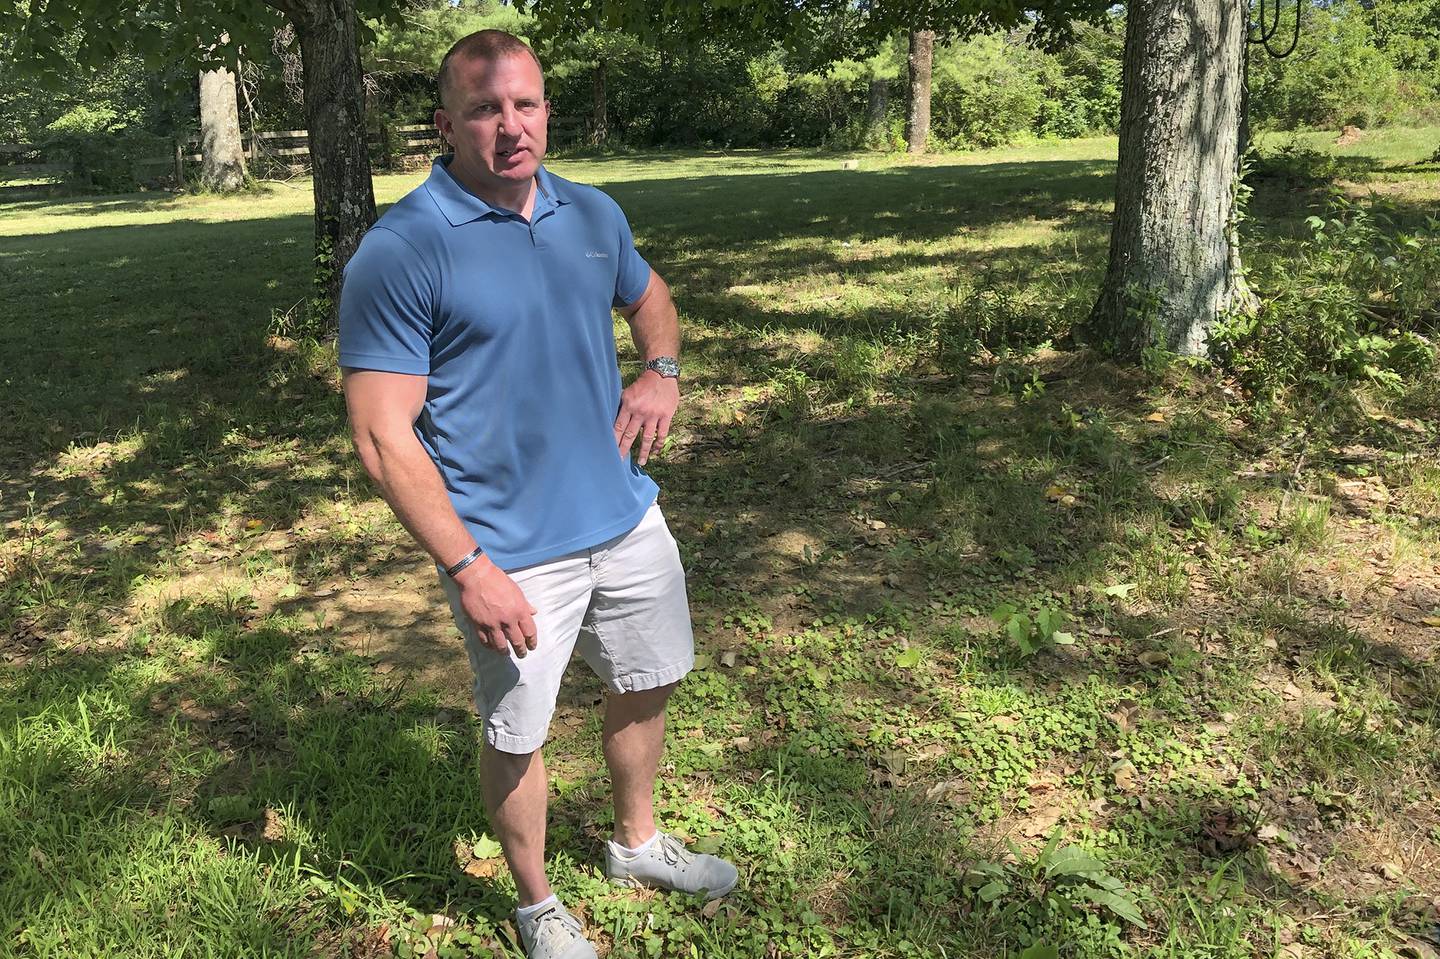 In this photo made on July 29, 2020, Bryan Hillberg, stands in his yard in Waynesville, Ohio.